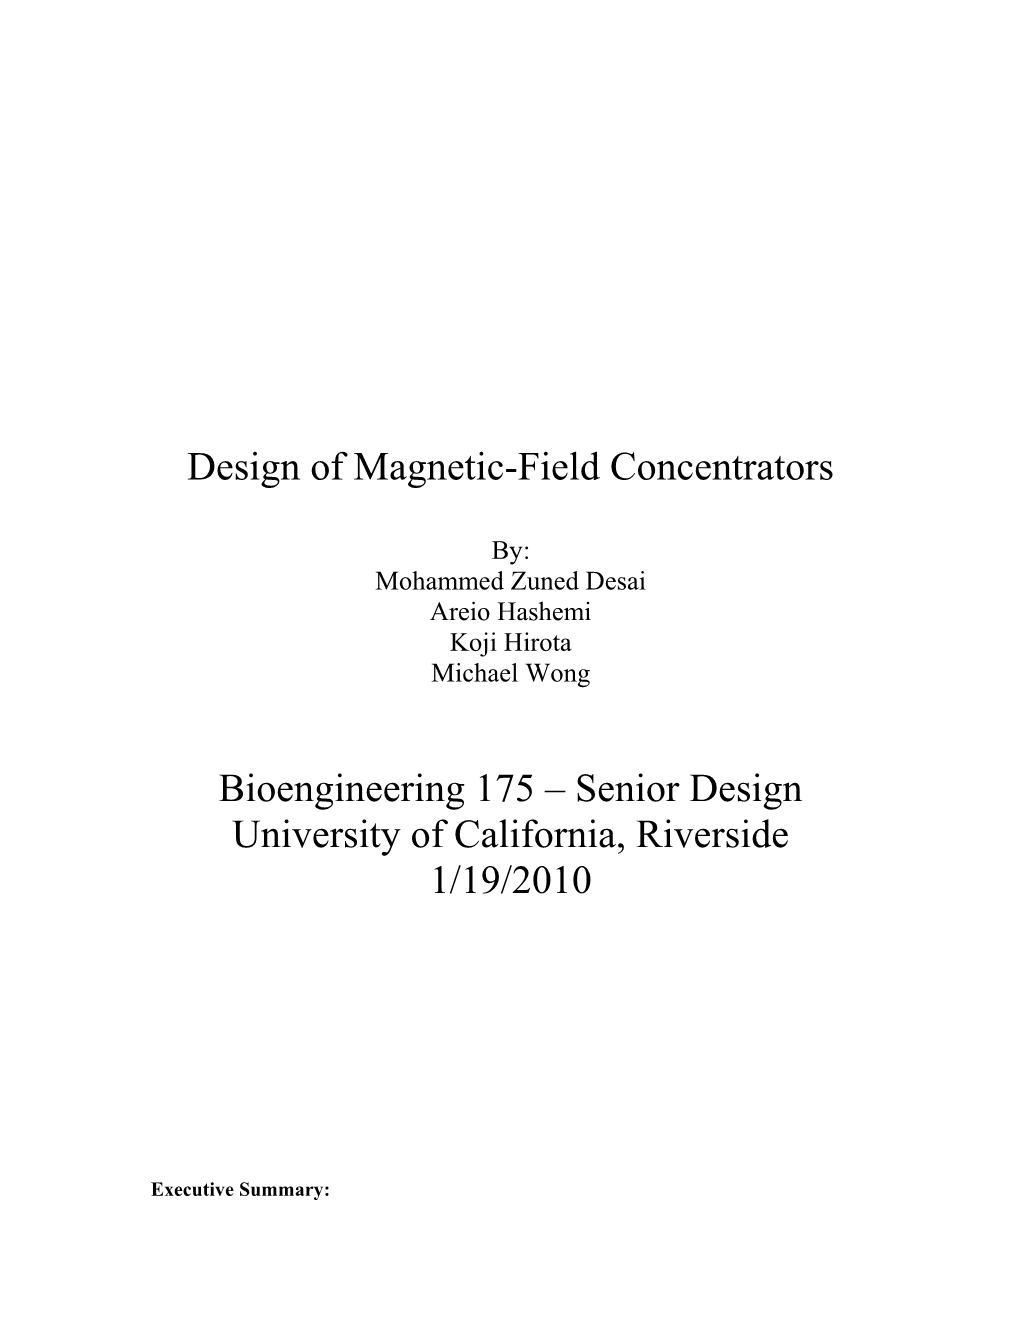 Design Of Magnetic-Field Concentrators